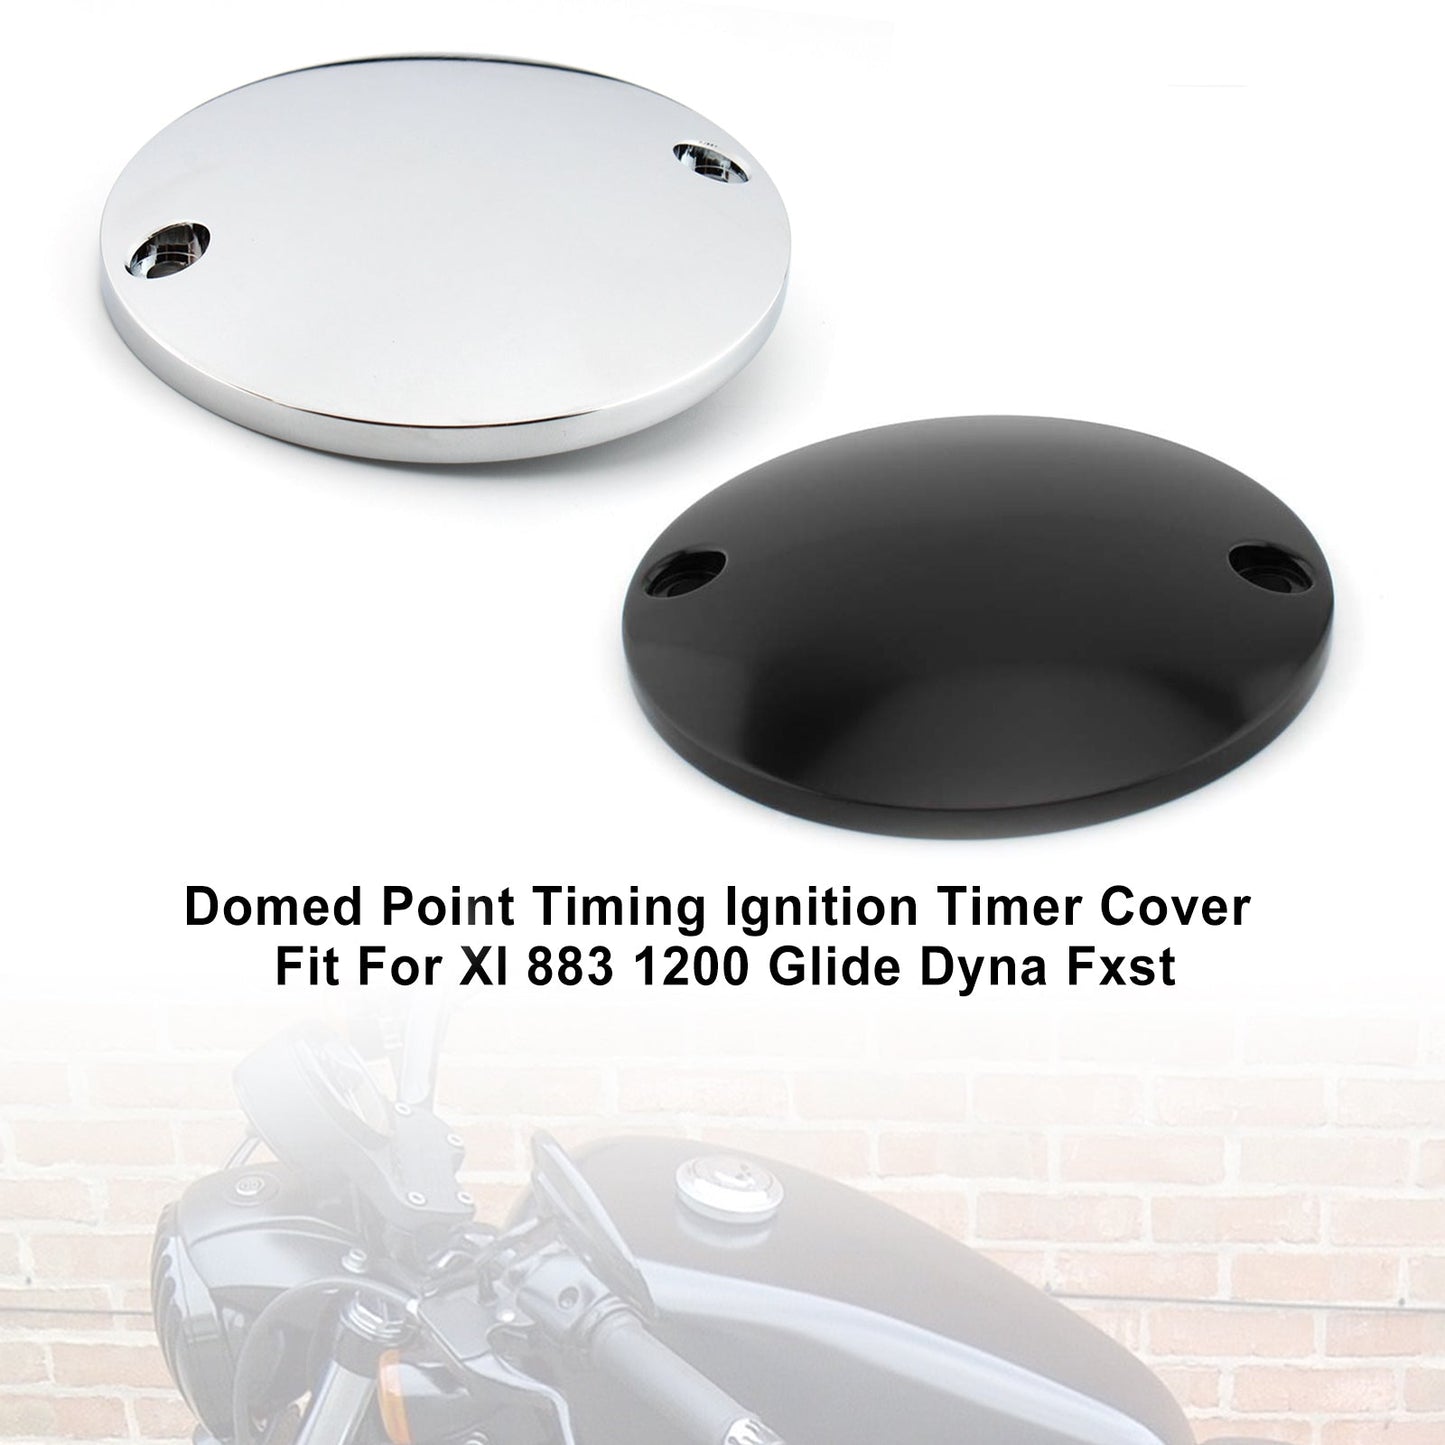 Domed Point Timing Ignition Timer Cover Black For Xl 883 1200 Glide Dyna Fxst